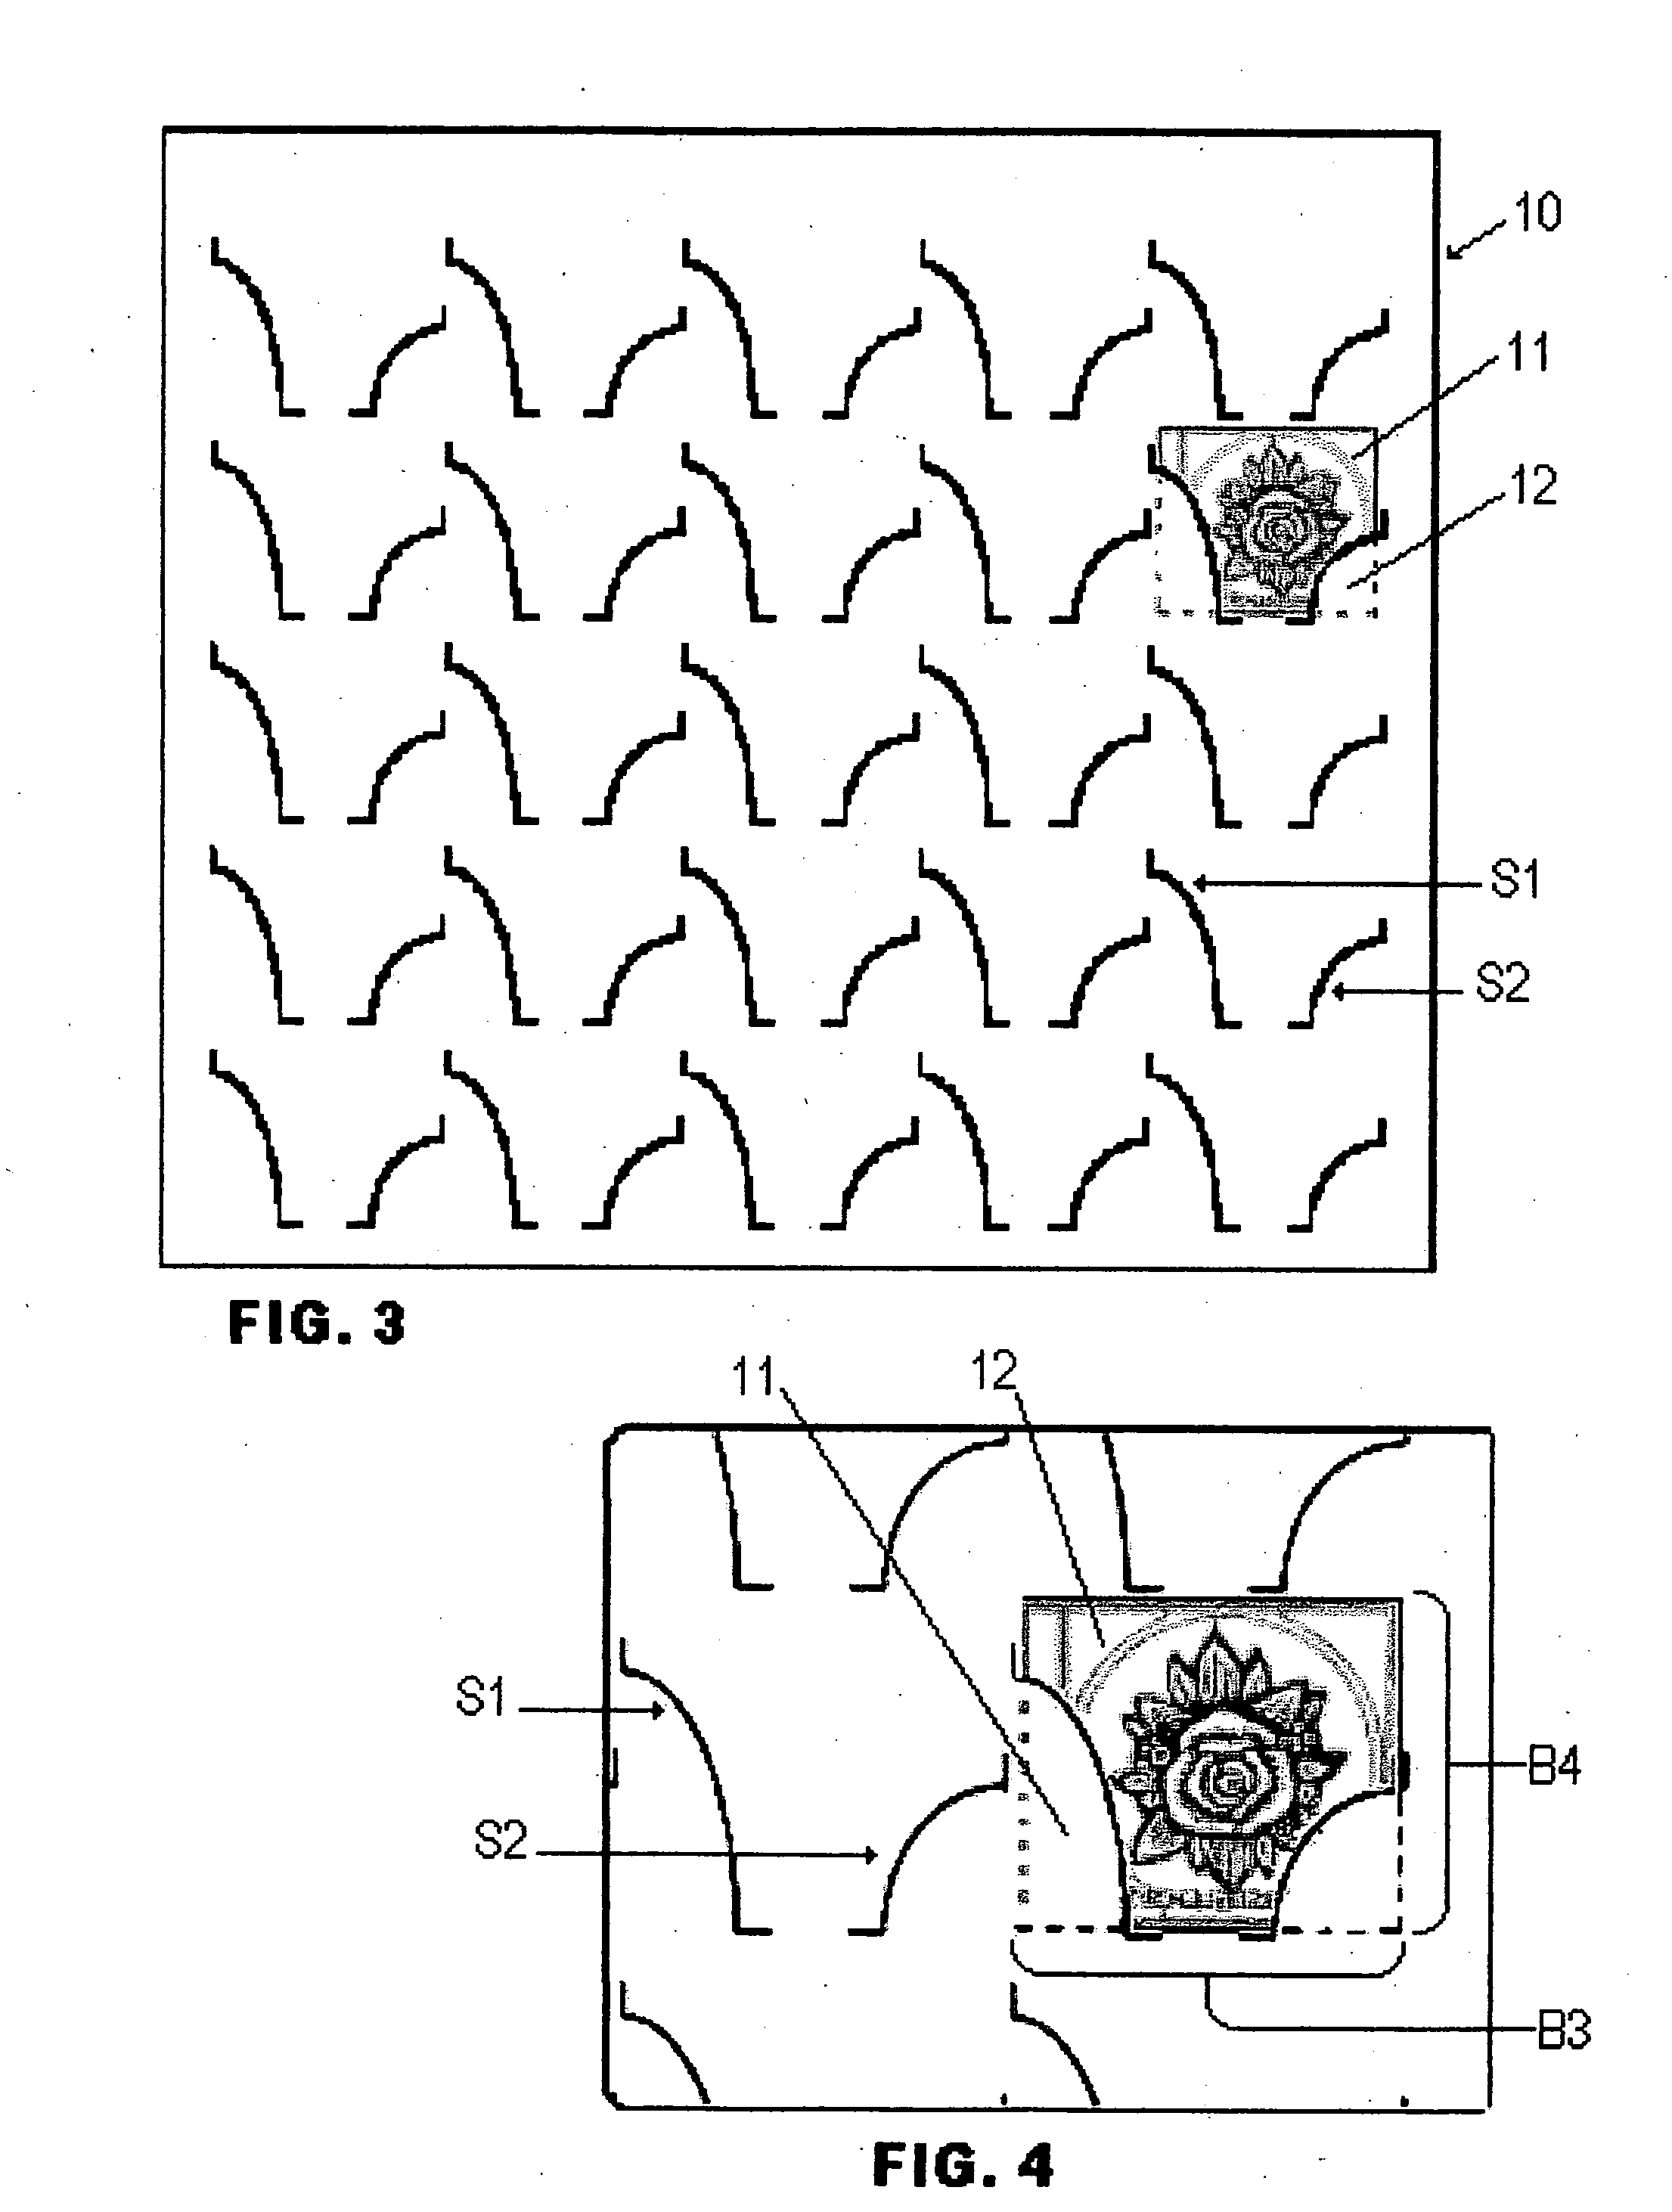 Display and storage device